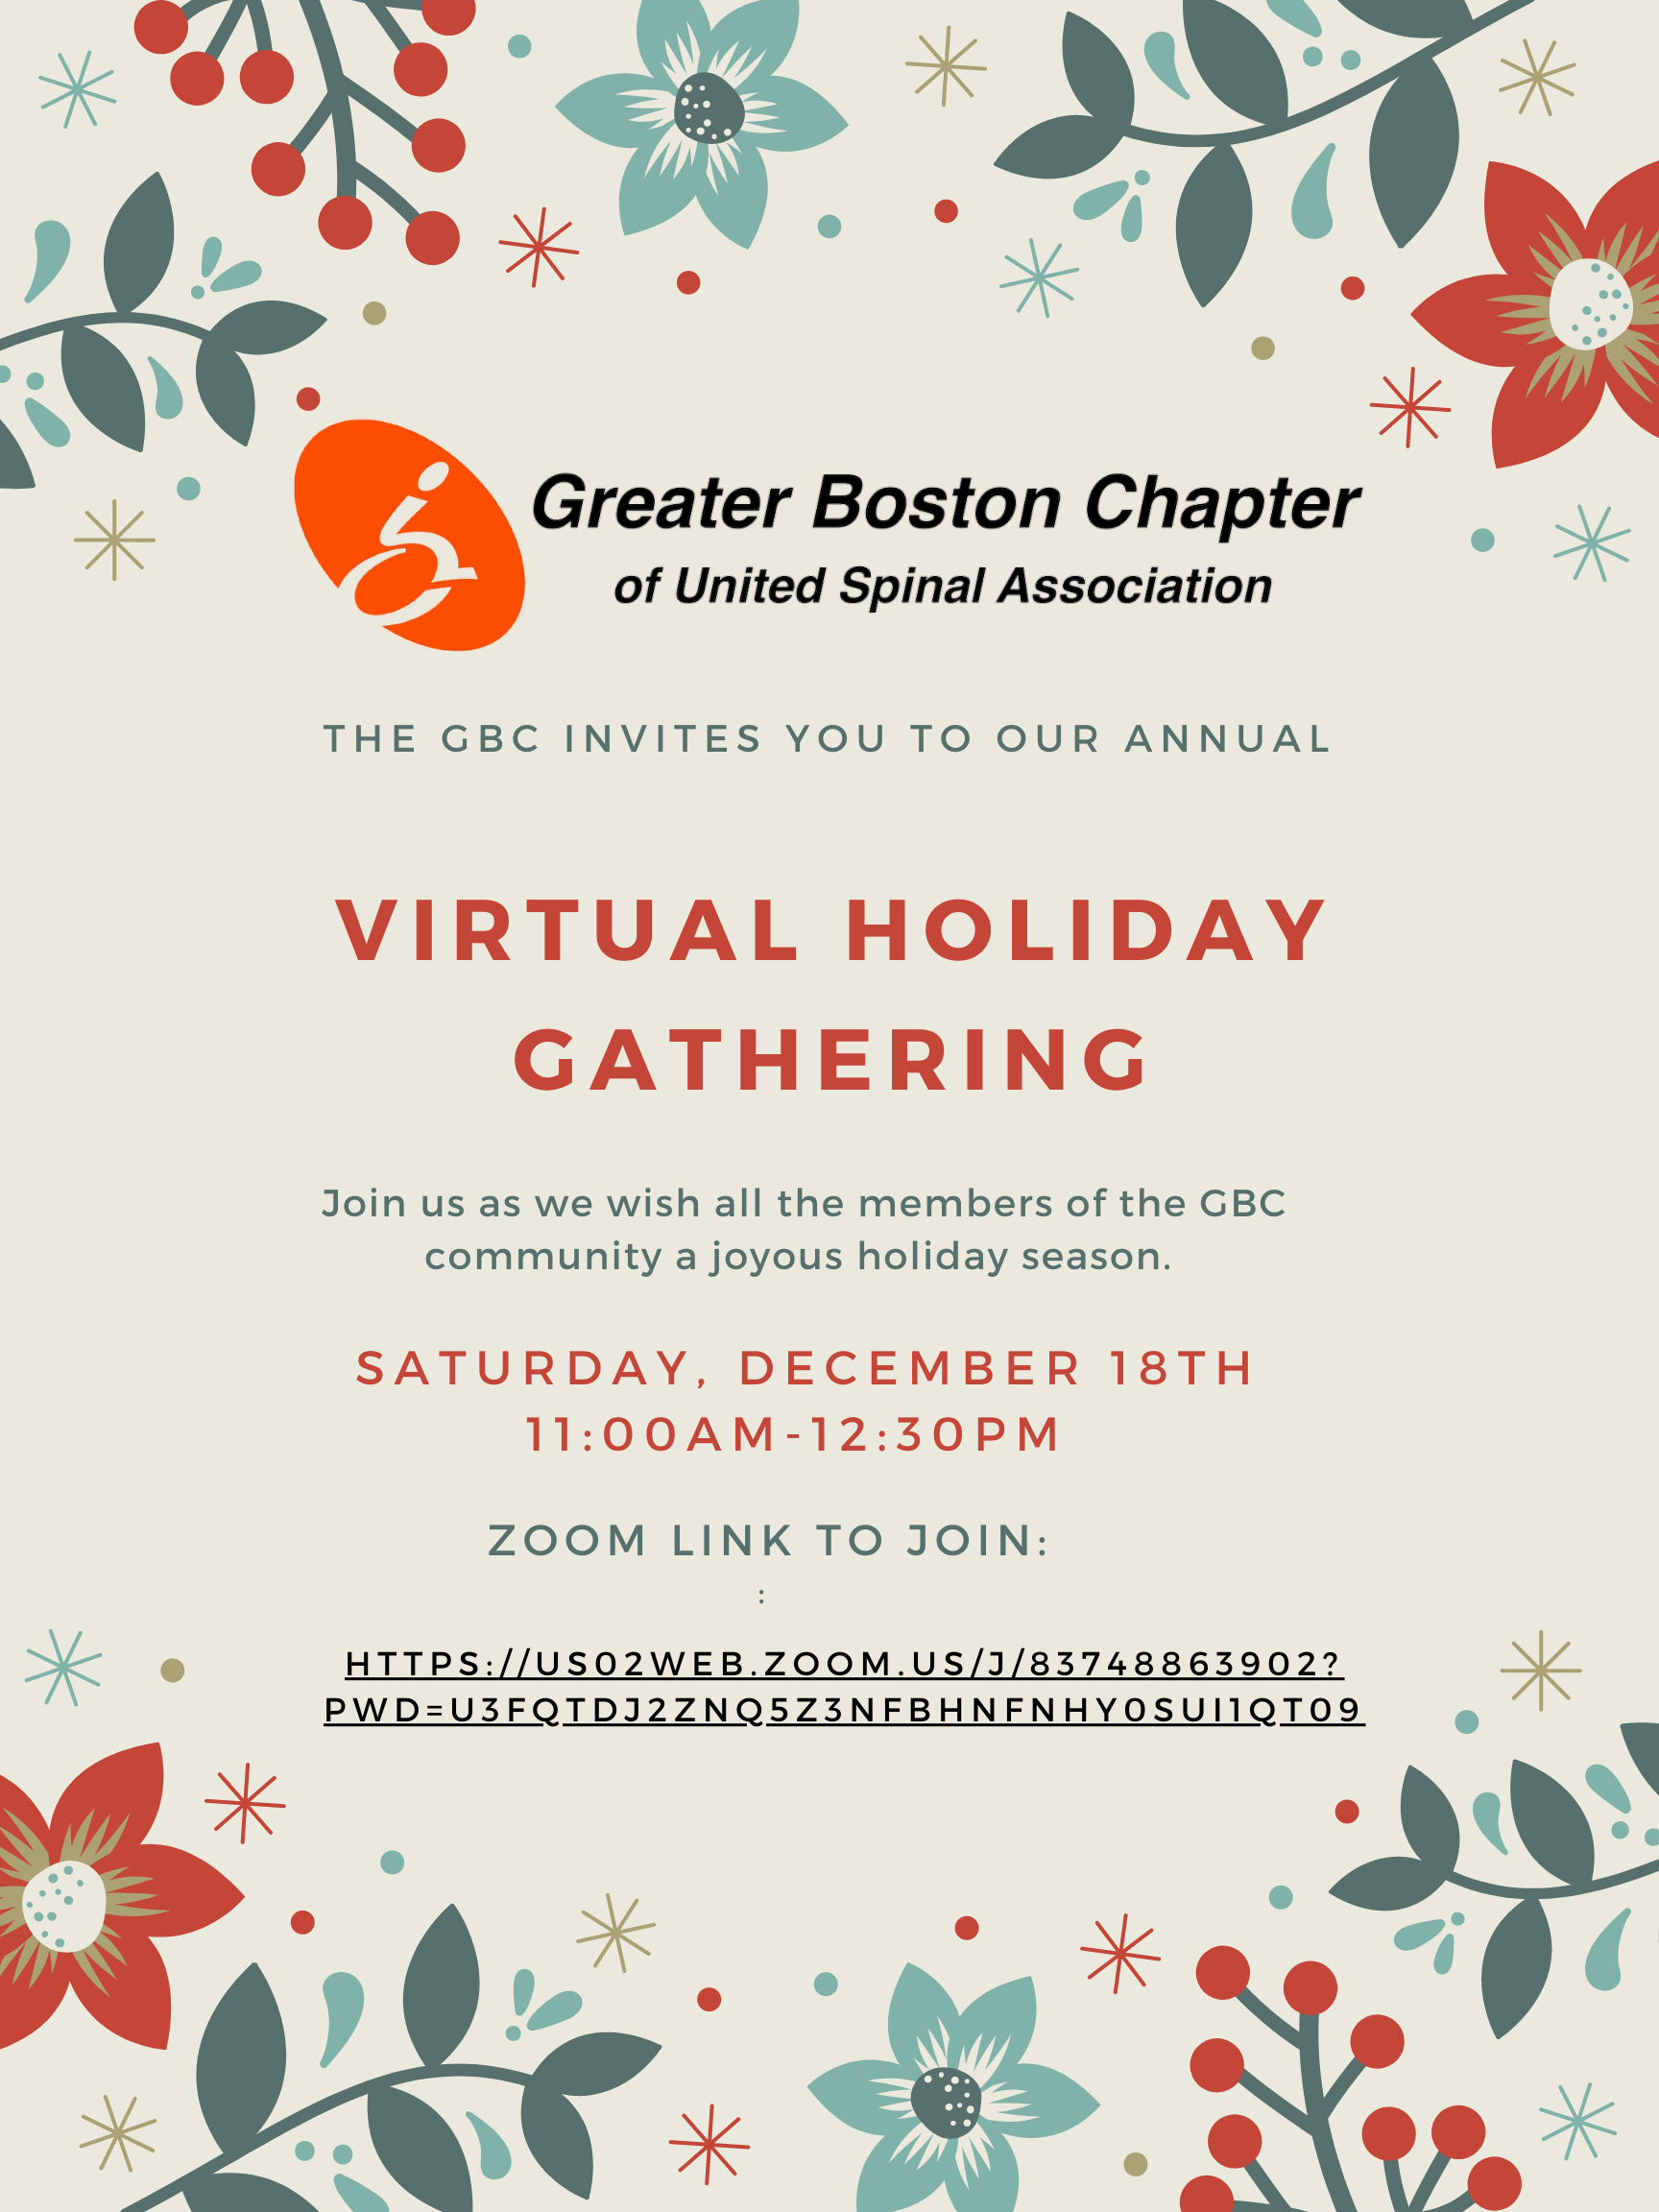 This is a flyer with the GBC logo at the top. Holiday decorations adorn the flyer. The flyer reads: the GBC invite you to our annual virtual holiday gathering. Join us as we wish all the members of the GBC community a joyous holiday season. Saturday, December 18, 11 AM dash 12:30 PM. With a zoom link to join. If you click on the flyer it will bring you to our event page where there will be a hyperlink to join the meeting.